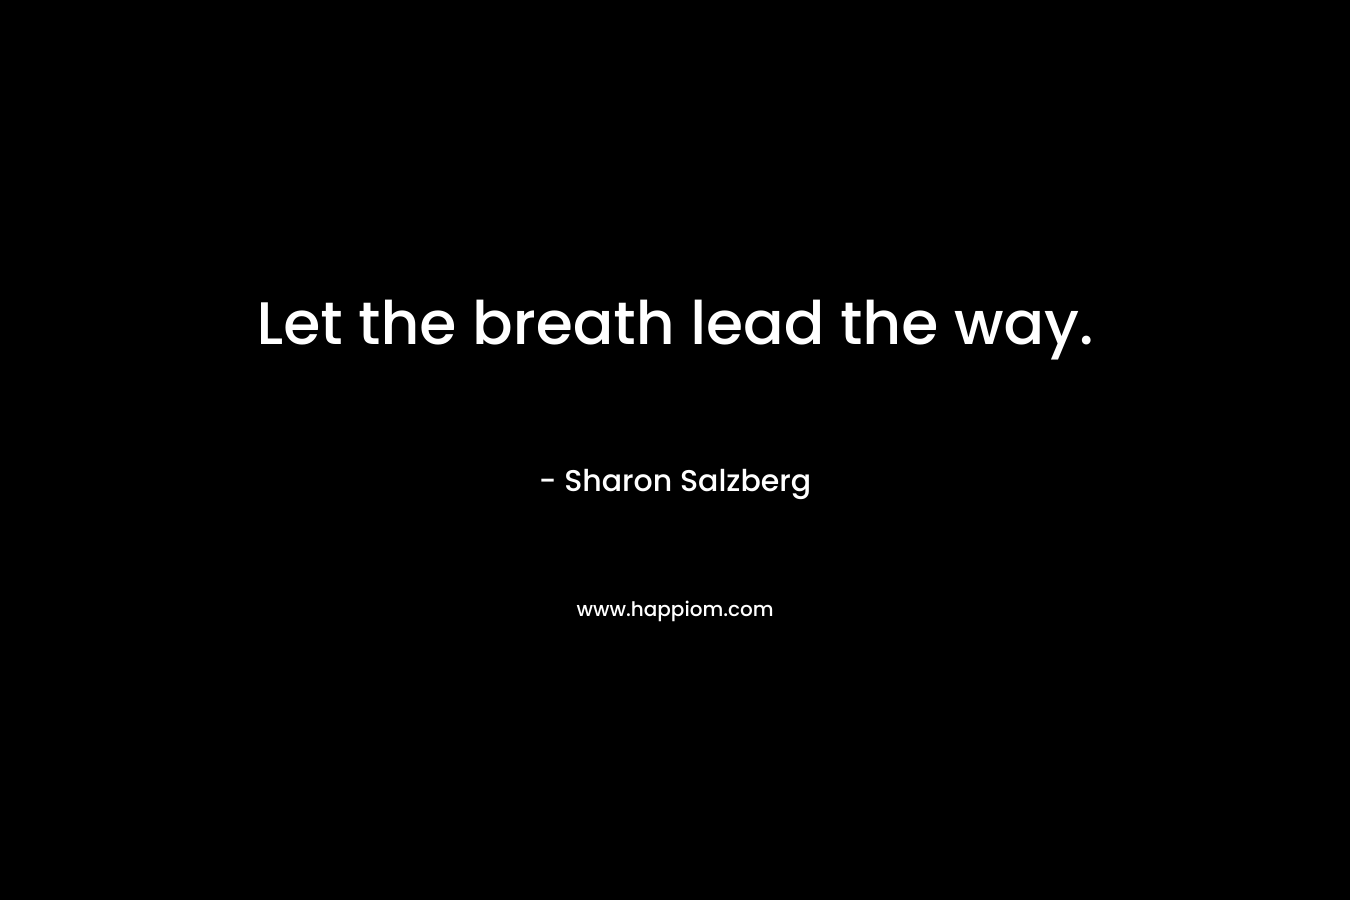 Let the breath lead the way.